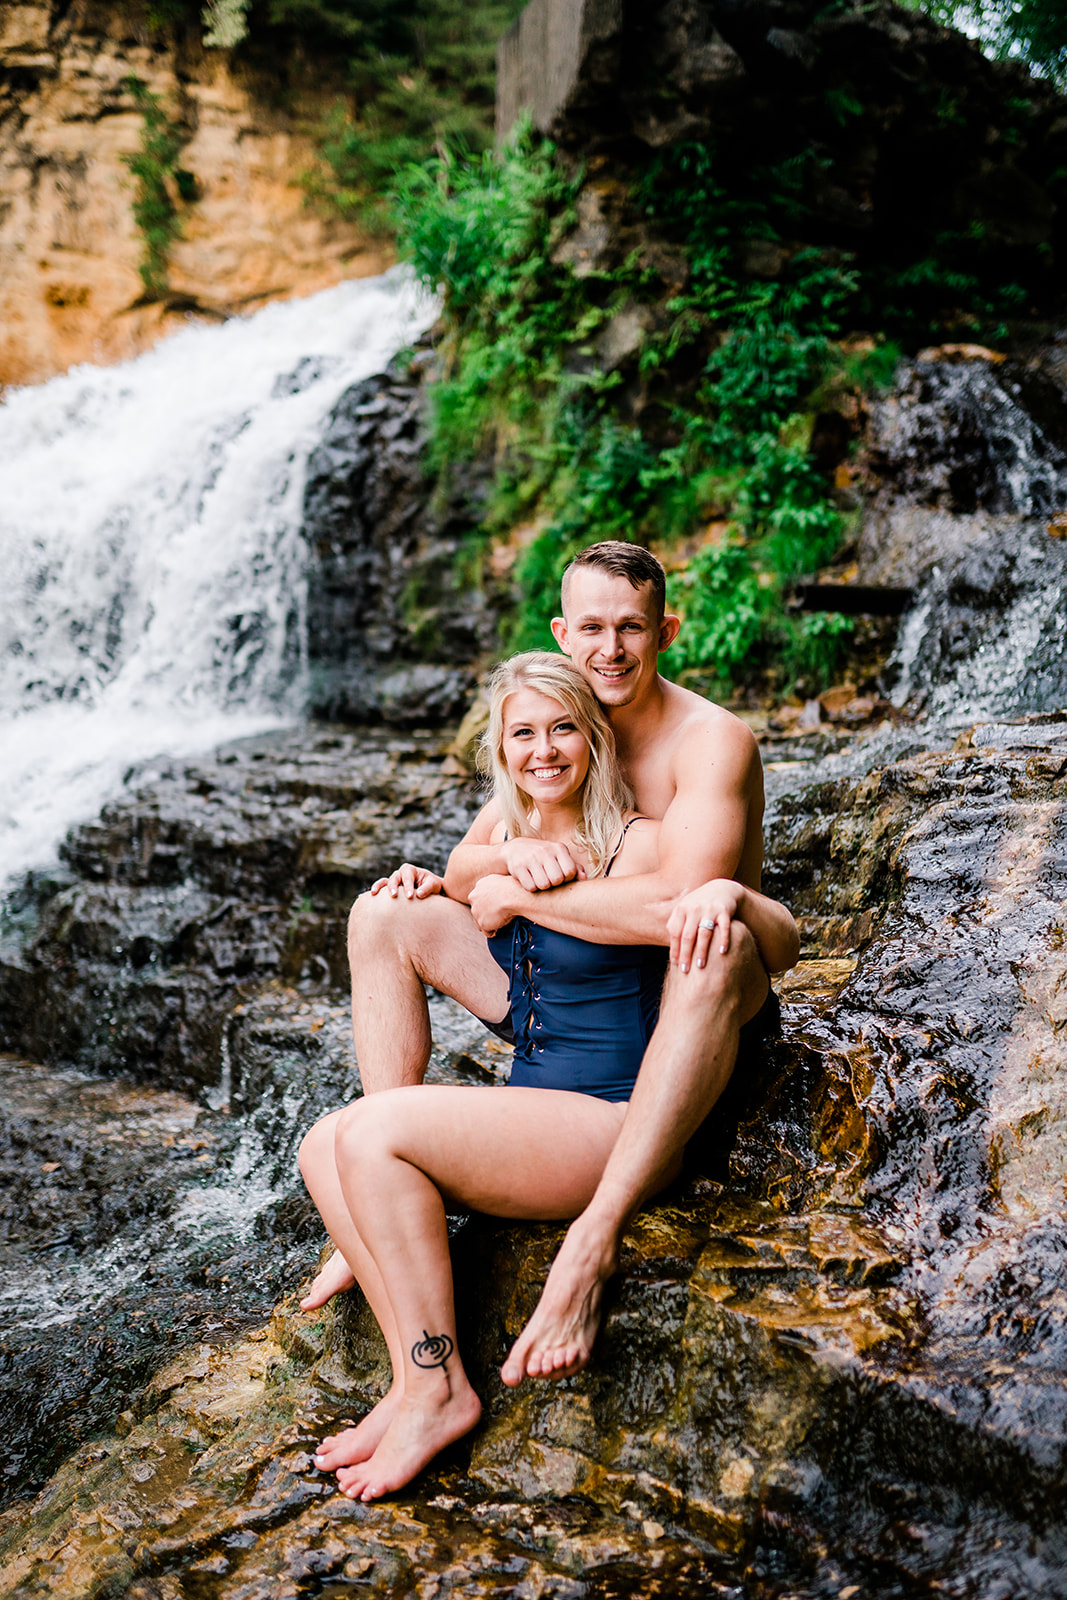 A newly engaged couple sits beside a majestic waterfall, posing for a picture together. The man tenderly wraps his arms around the woman, their smiles radiant with joy and anticipation for the journey ahead.